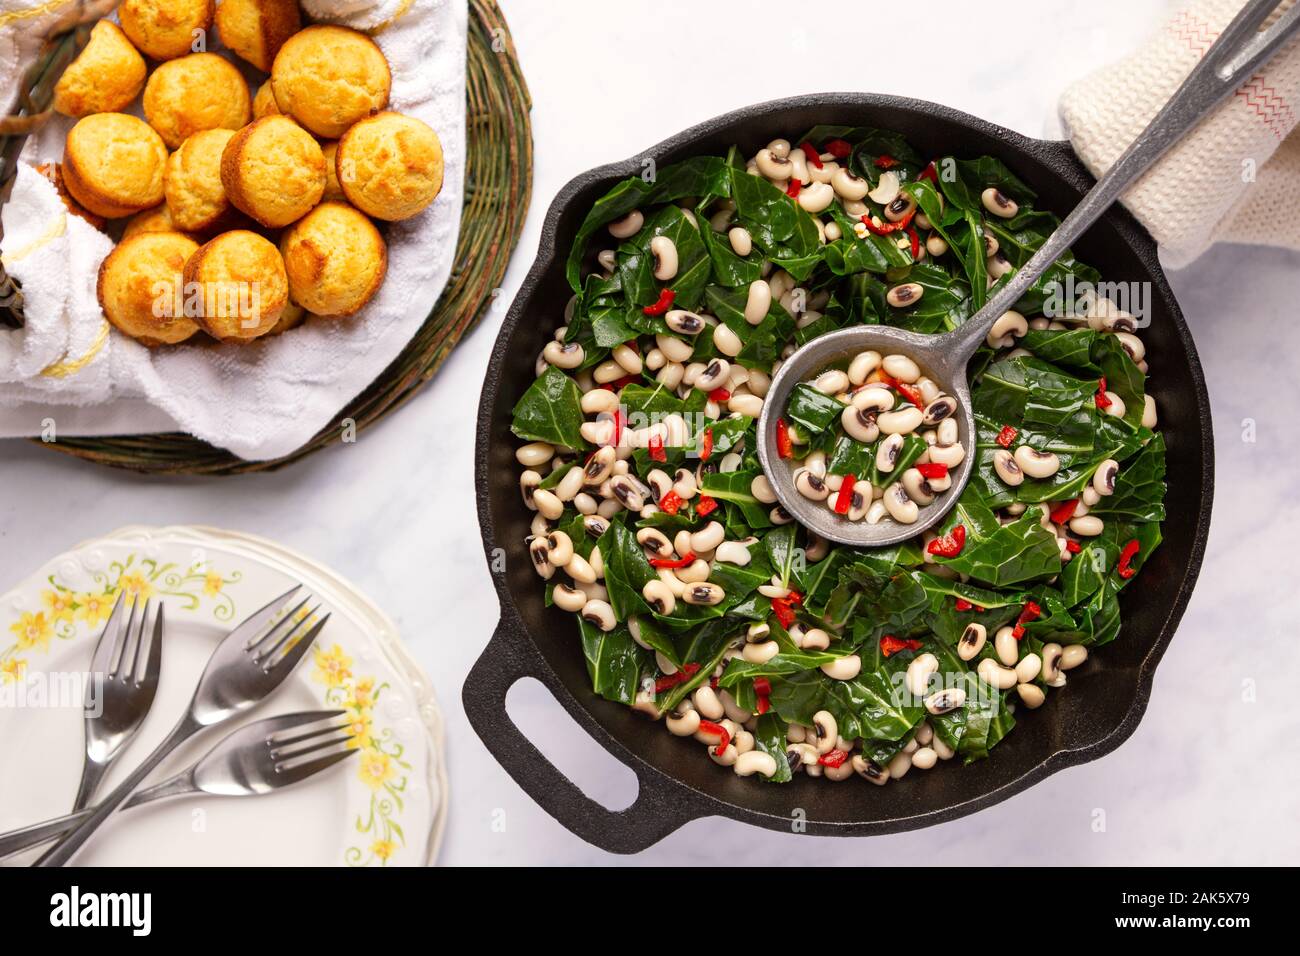 Overhead view of US southern dish of black-eye peas and collard greens with corn bread muffins Stock Photo